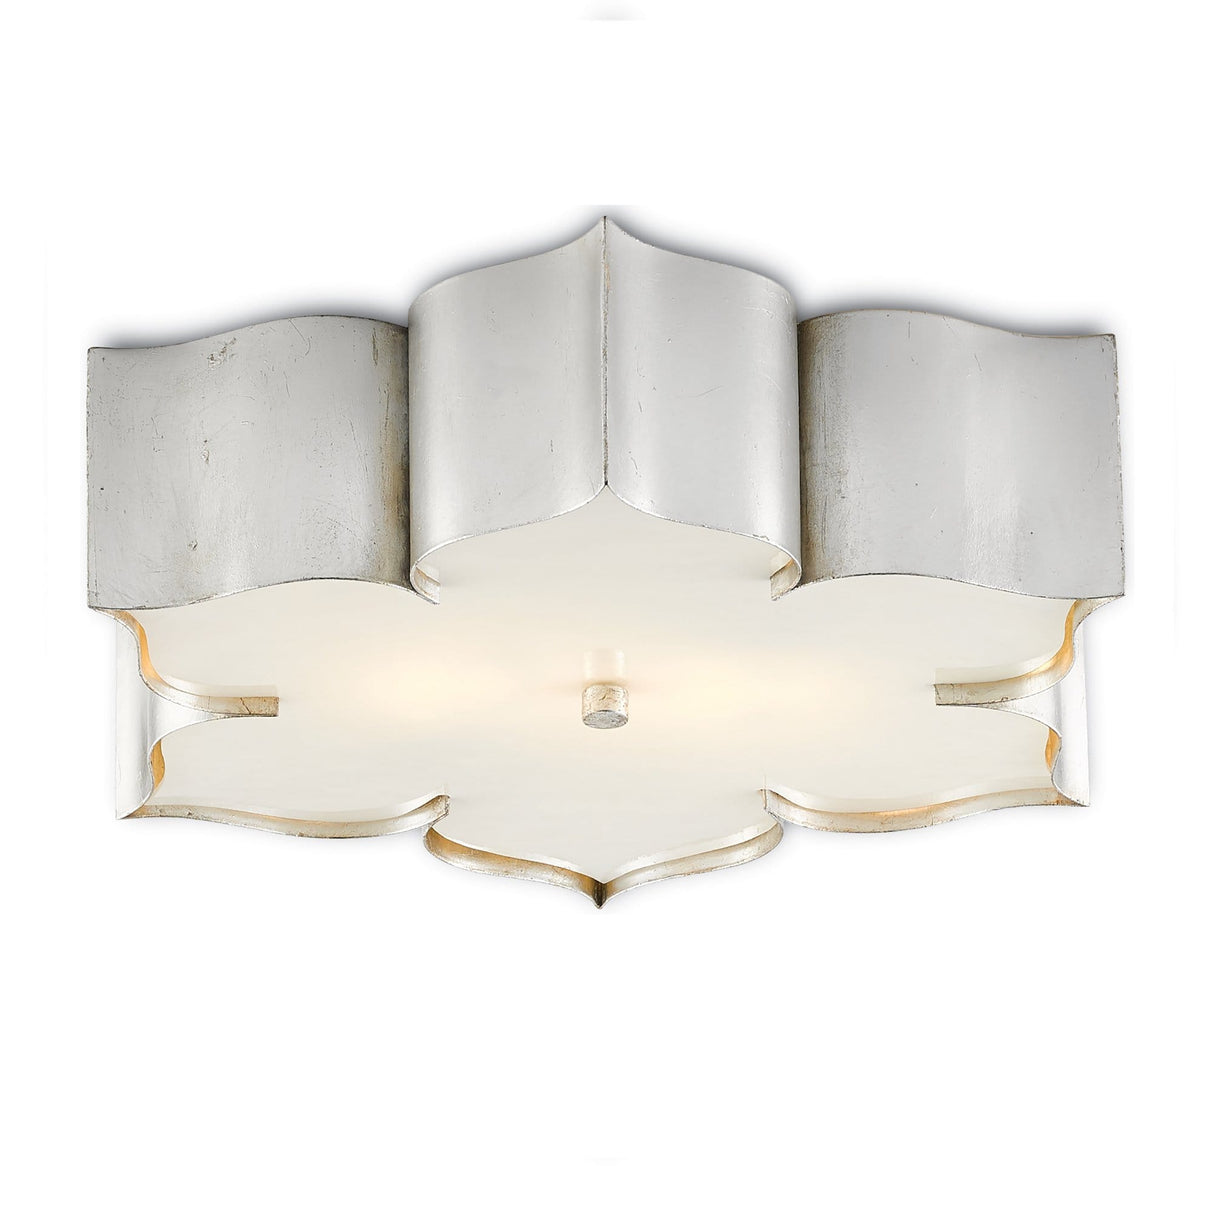 Currey and Company Grand Lotus Flush Mount Lighting Currey-Co-9999-0010